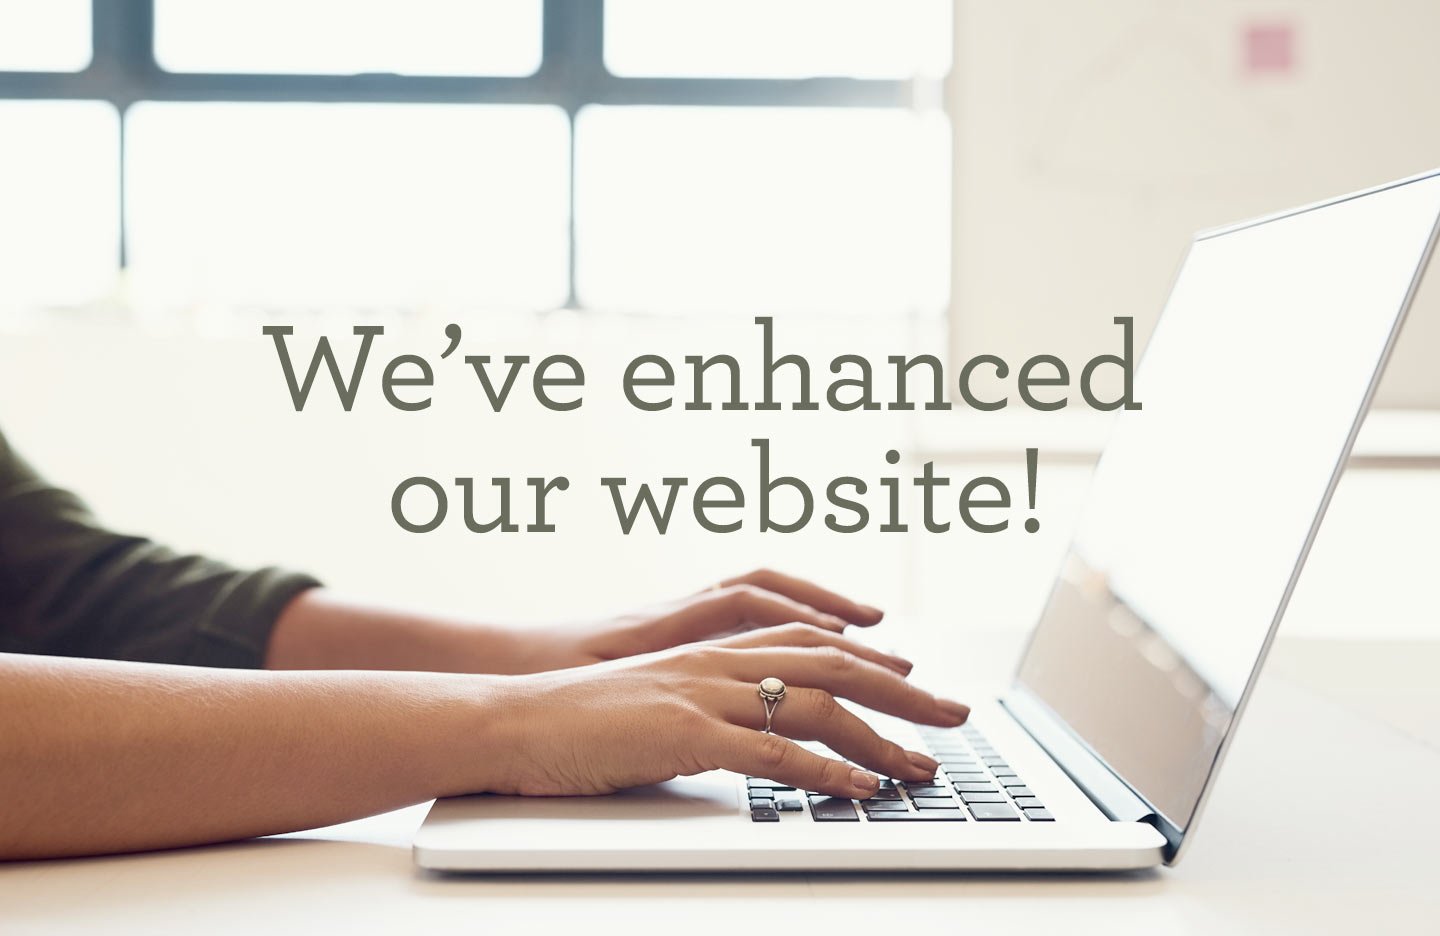 We have enchanced our website!